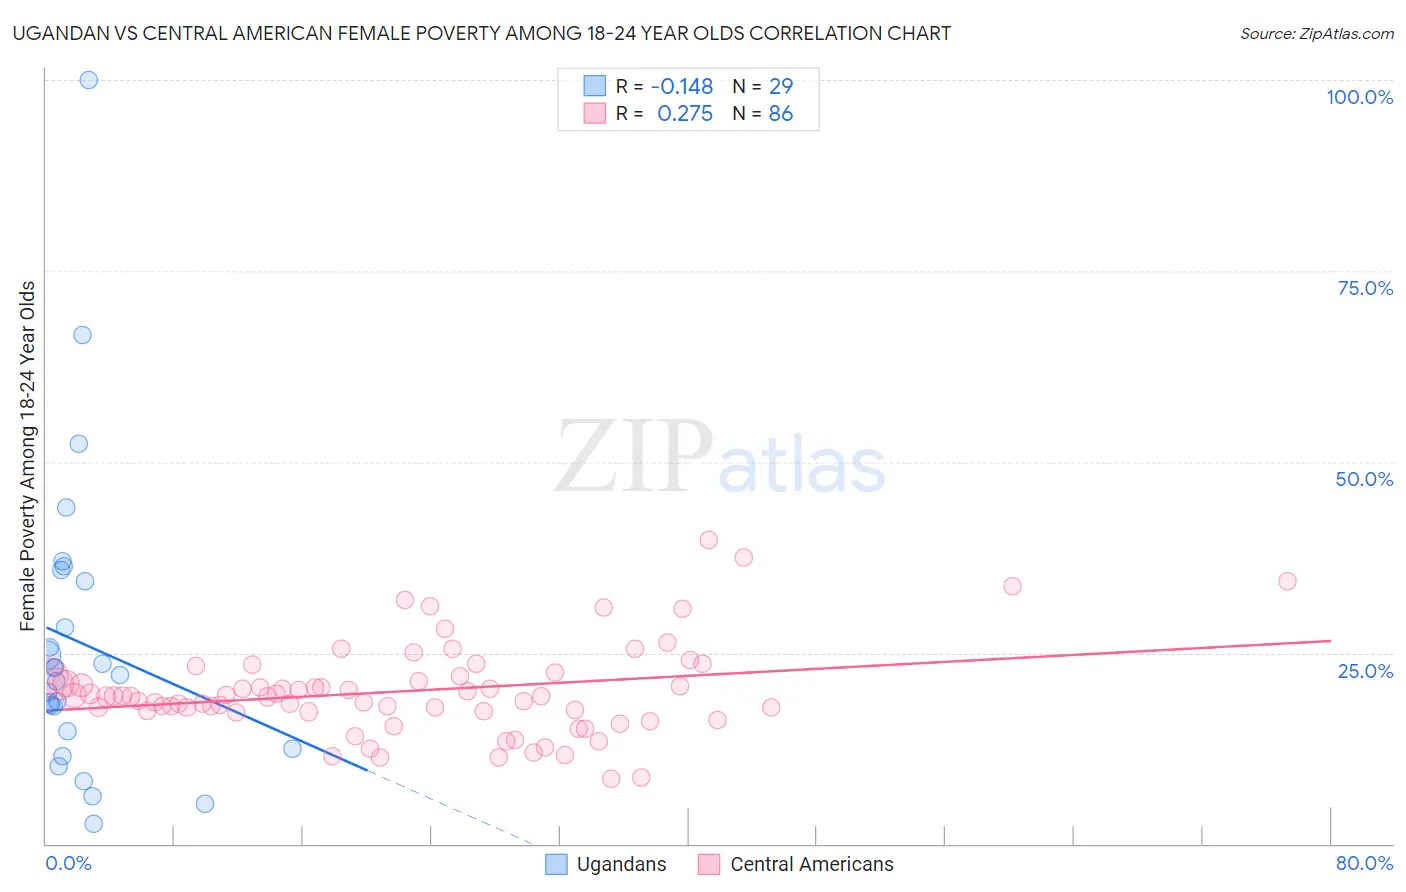 Ugandan vs Central American Female Poverty Among 18-24 Year Olds